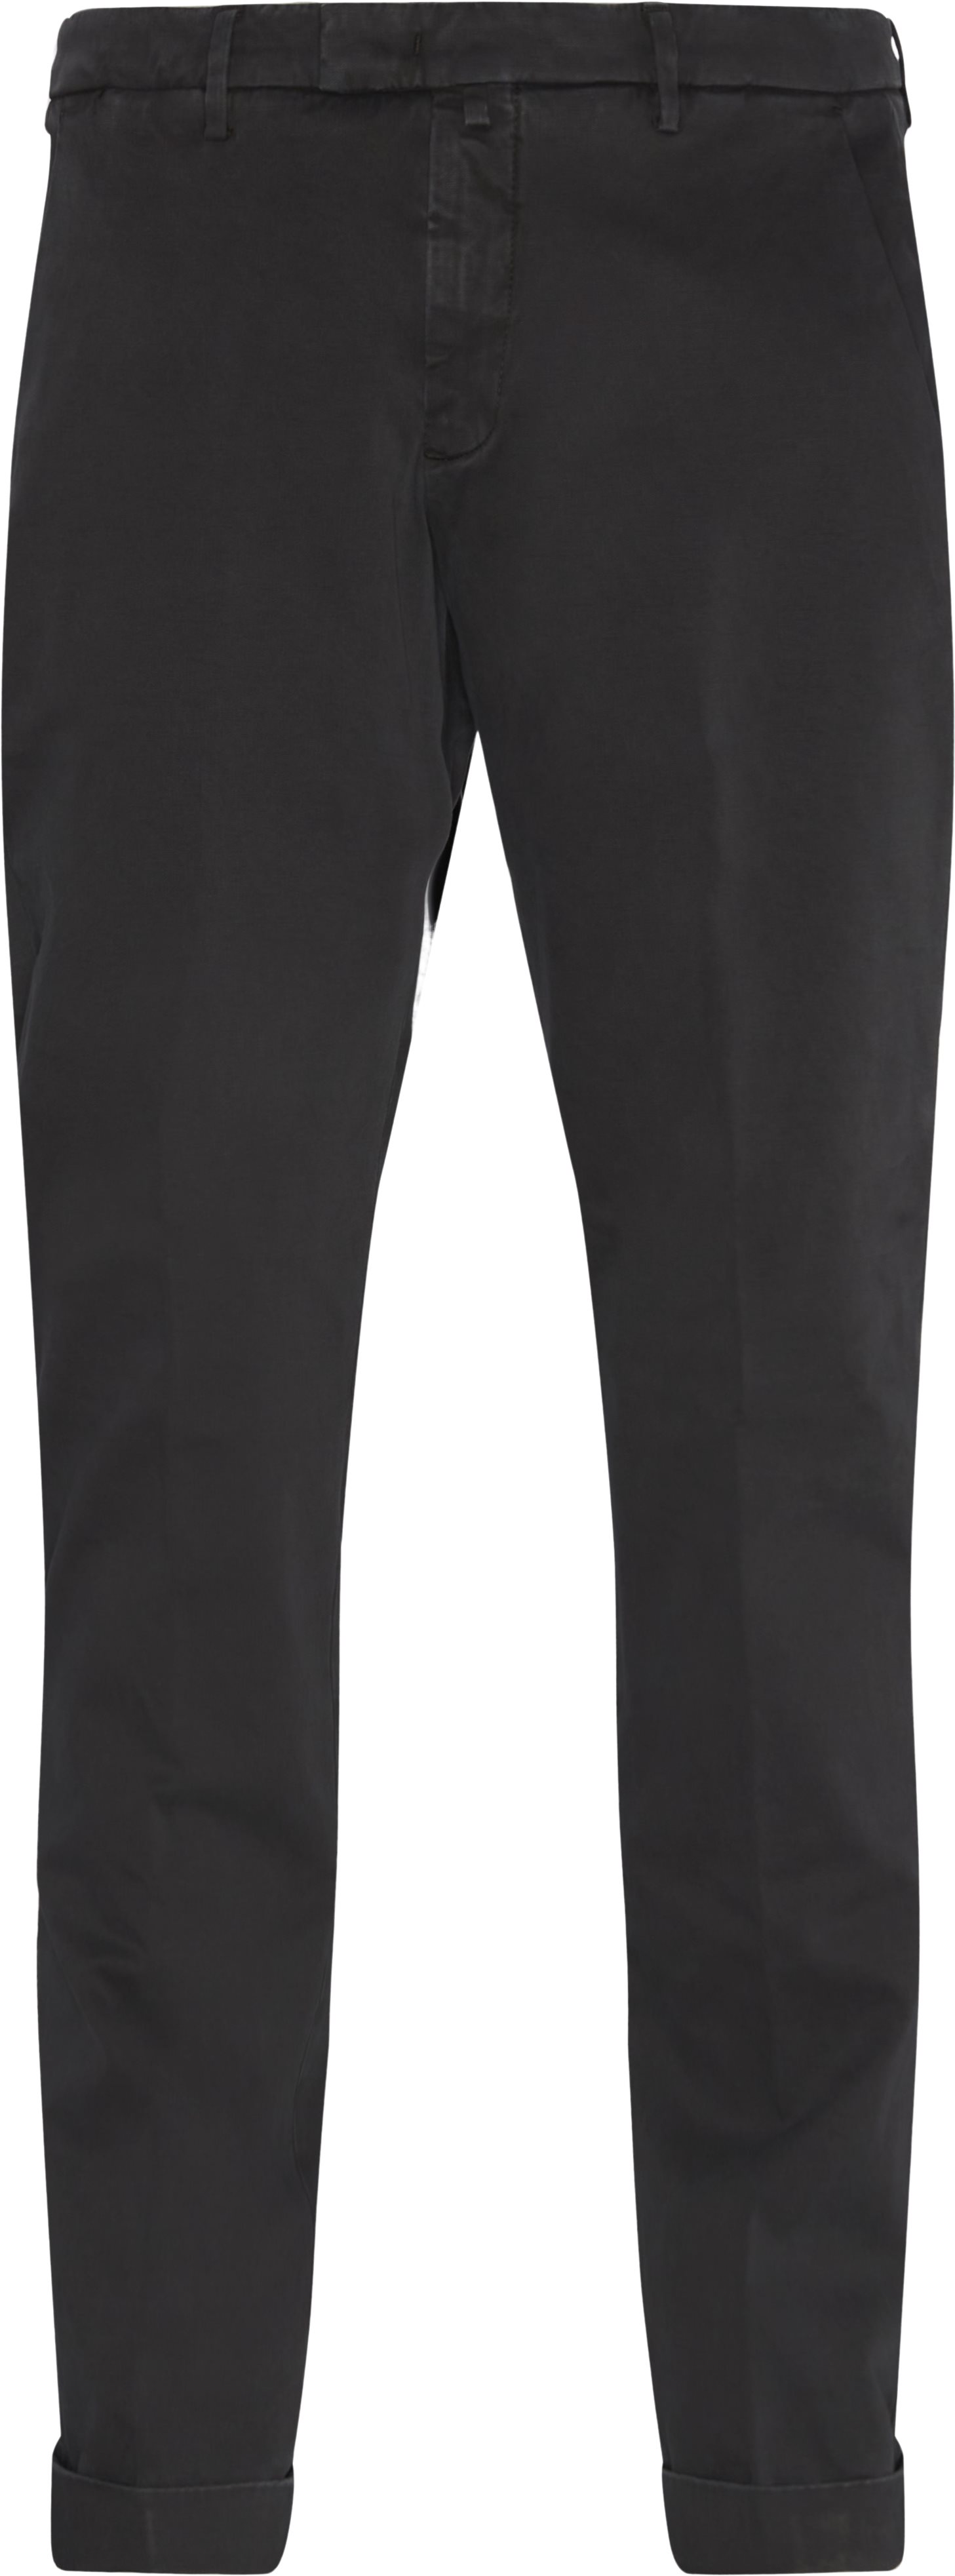 Chinos - Trousers - Regular fit - Grey